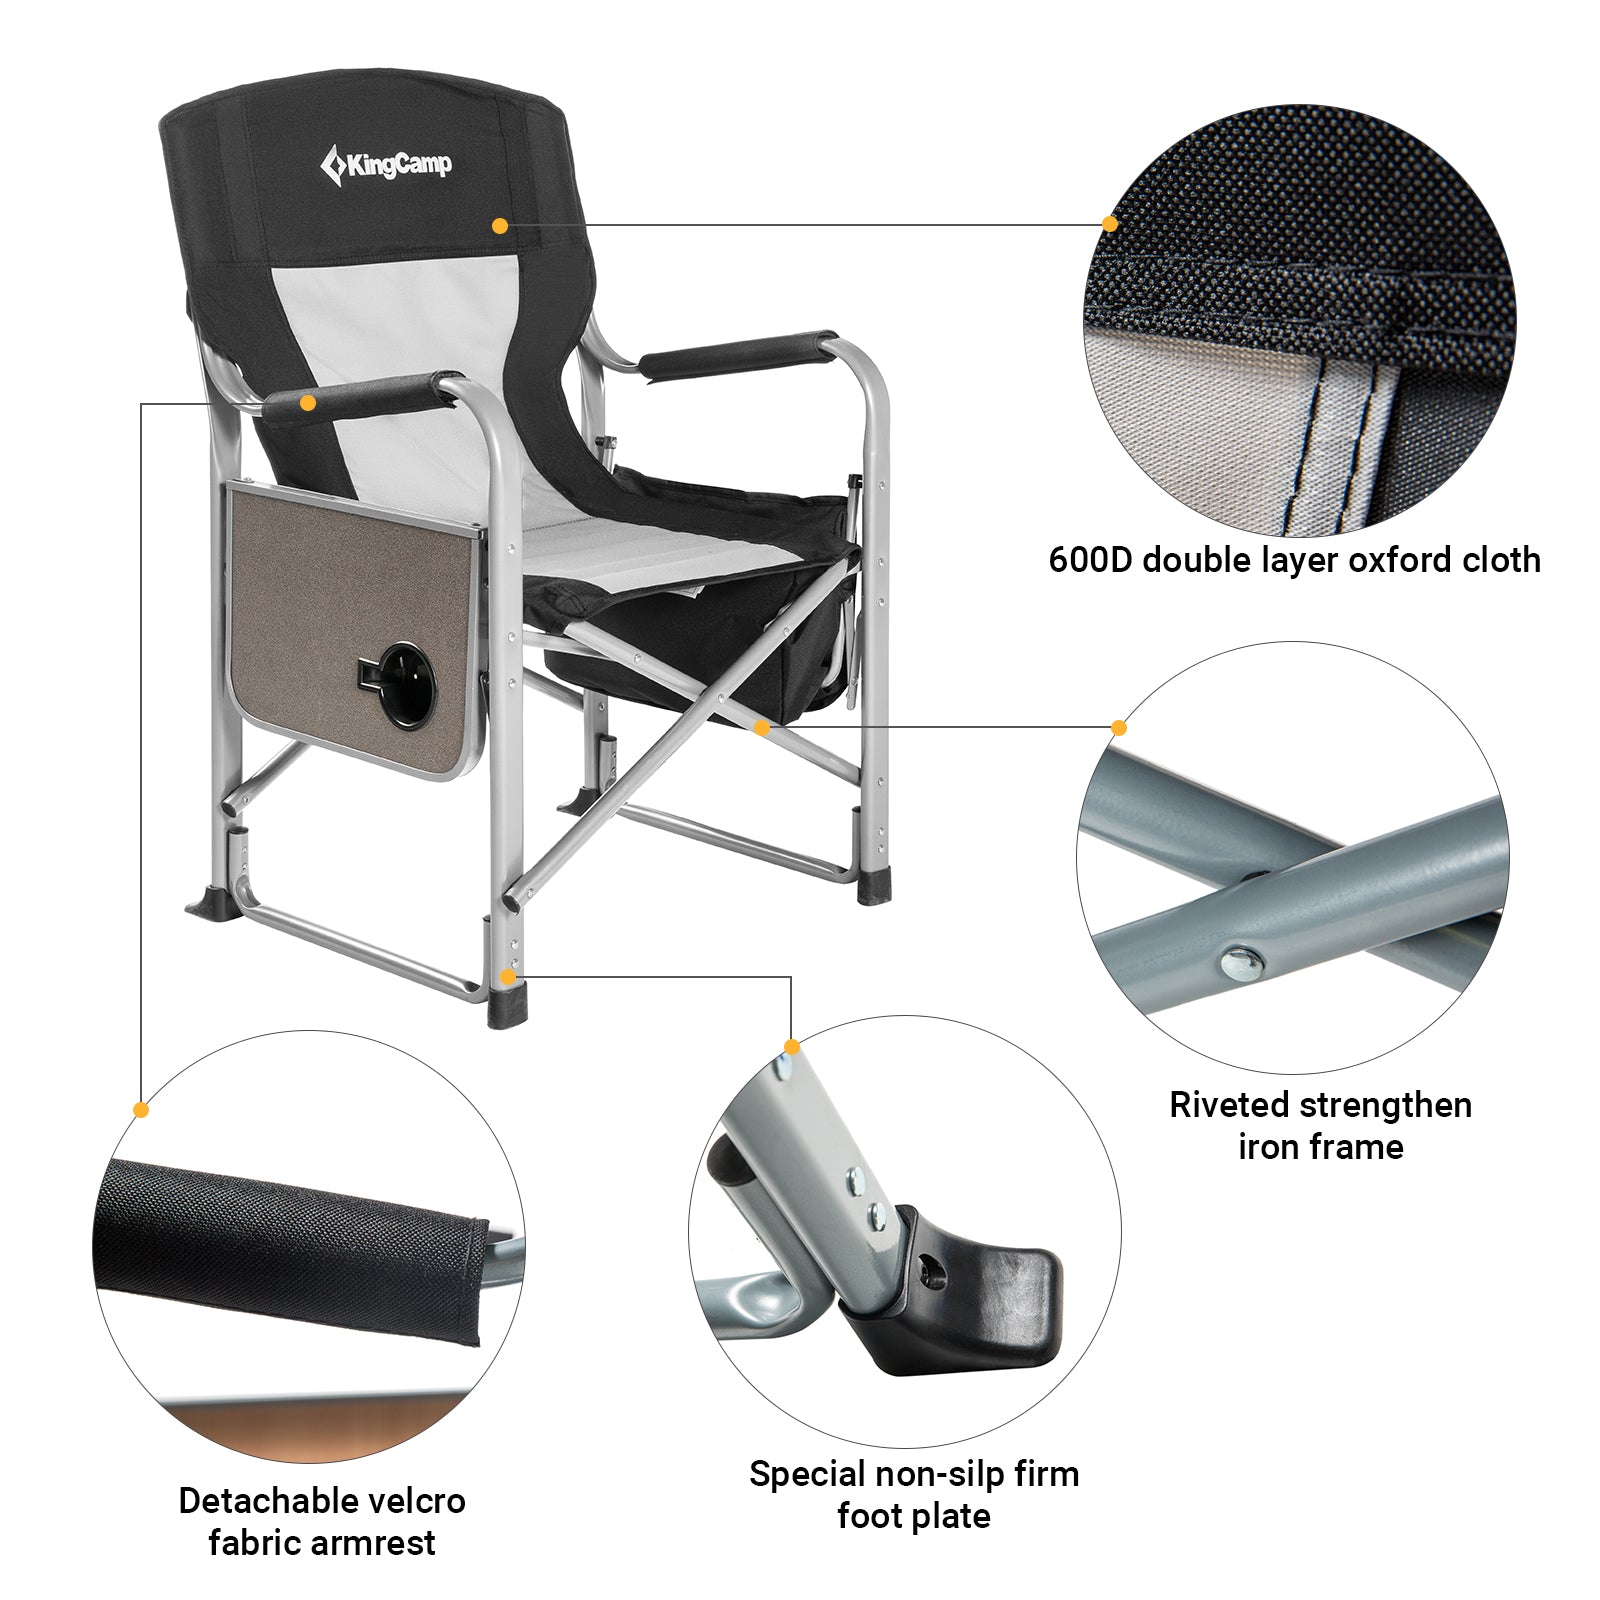 KingCamp Mesh Back Folding Chair with Cooler Bag